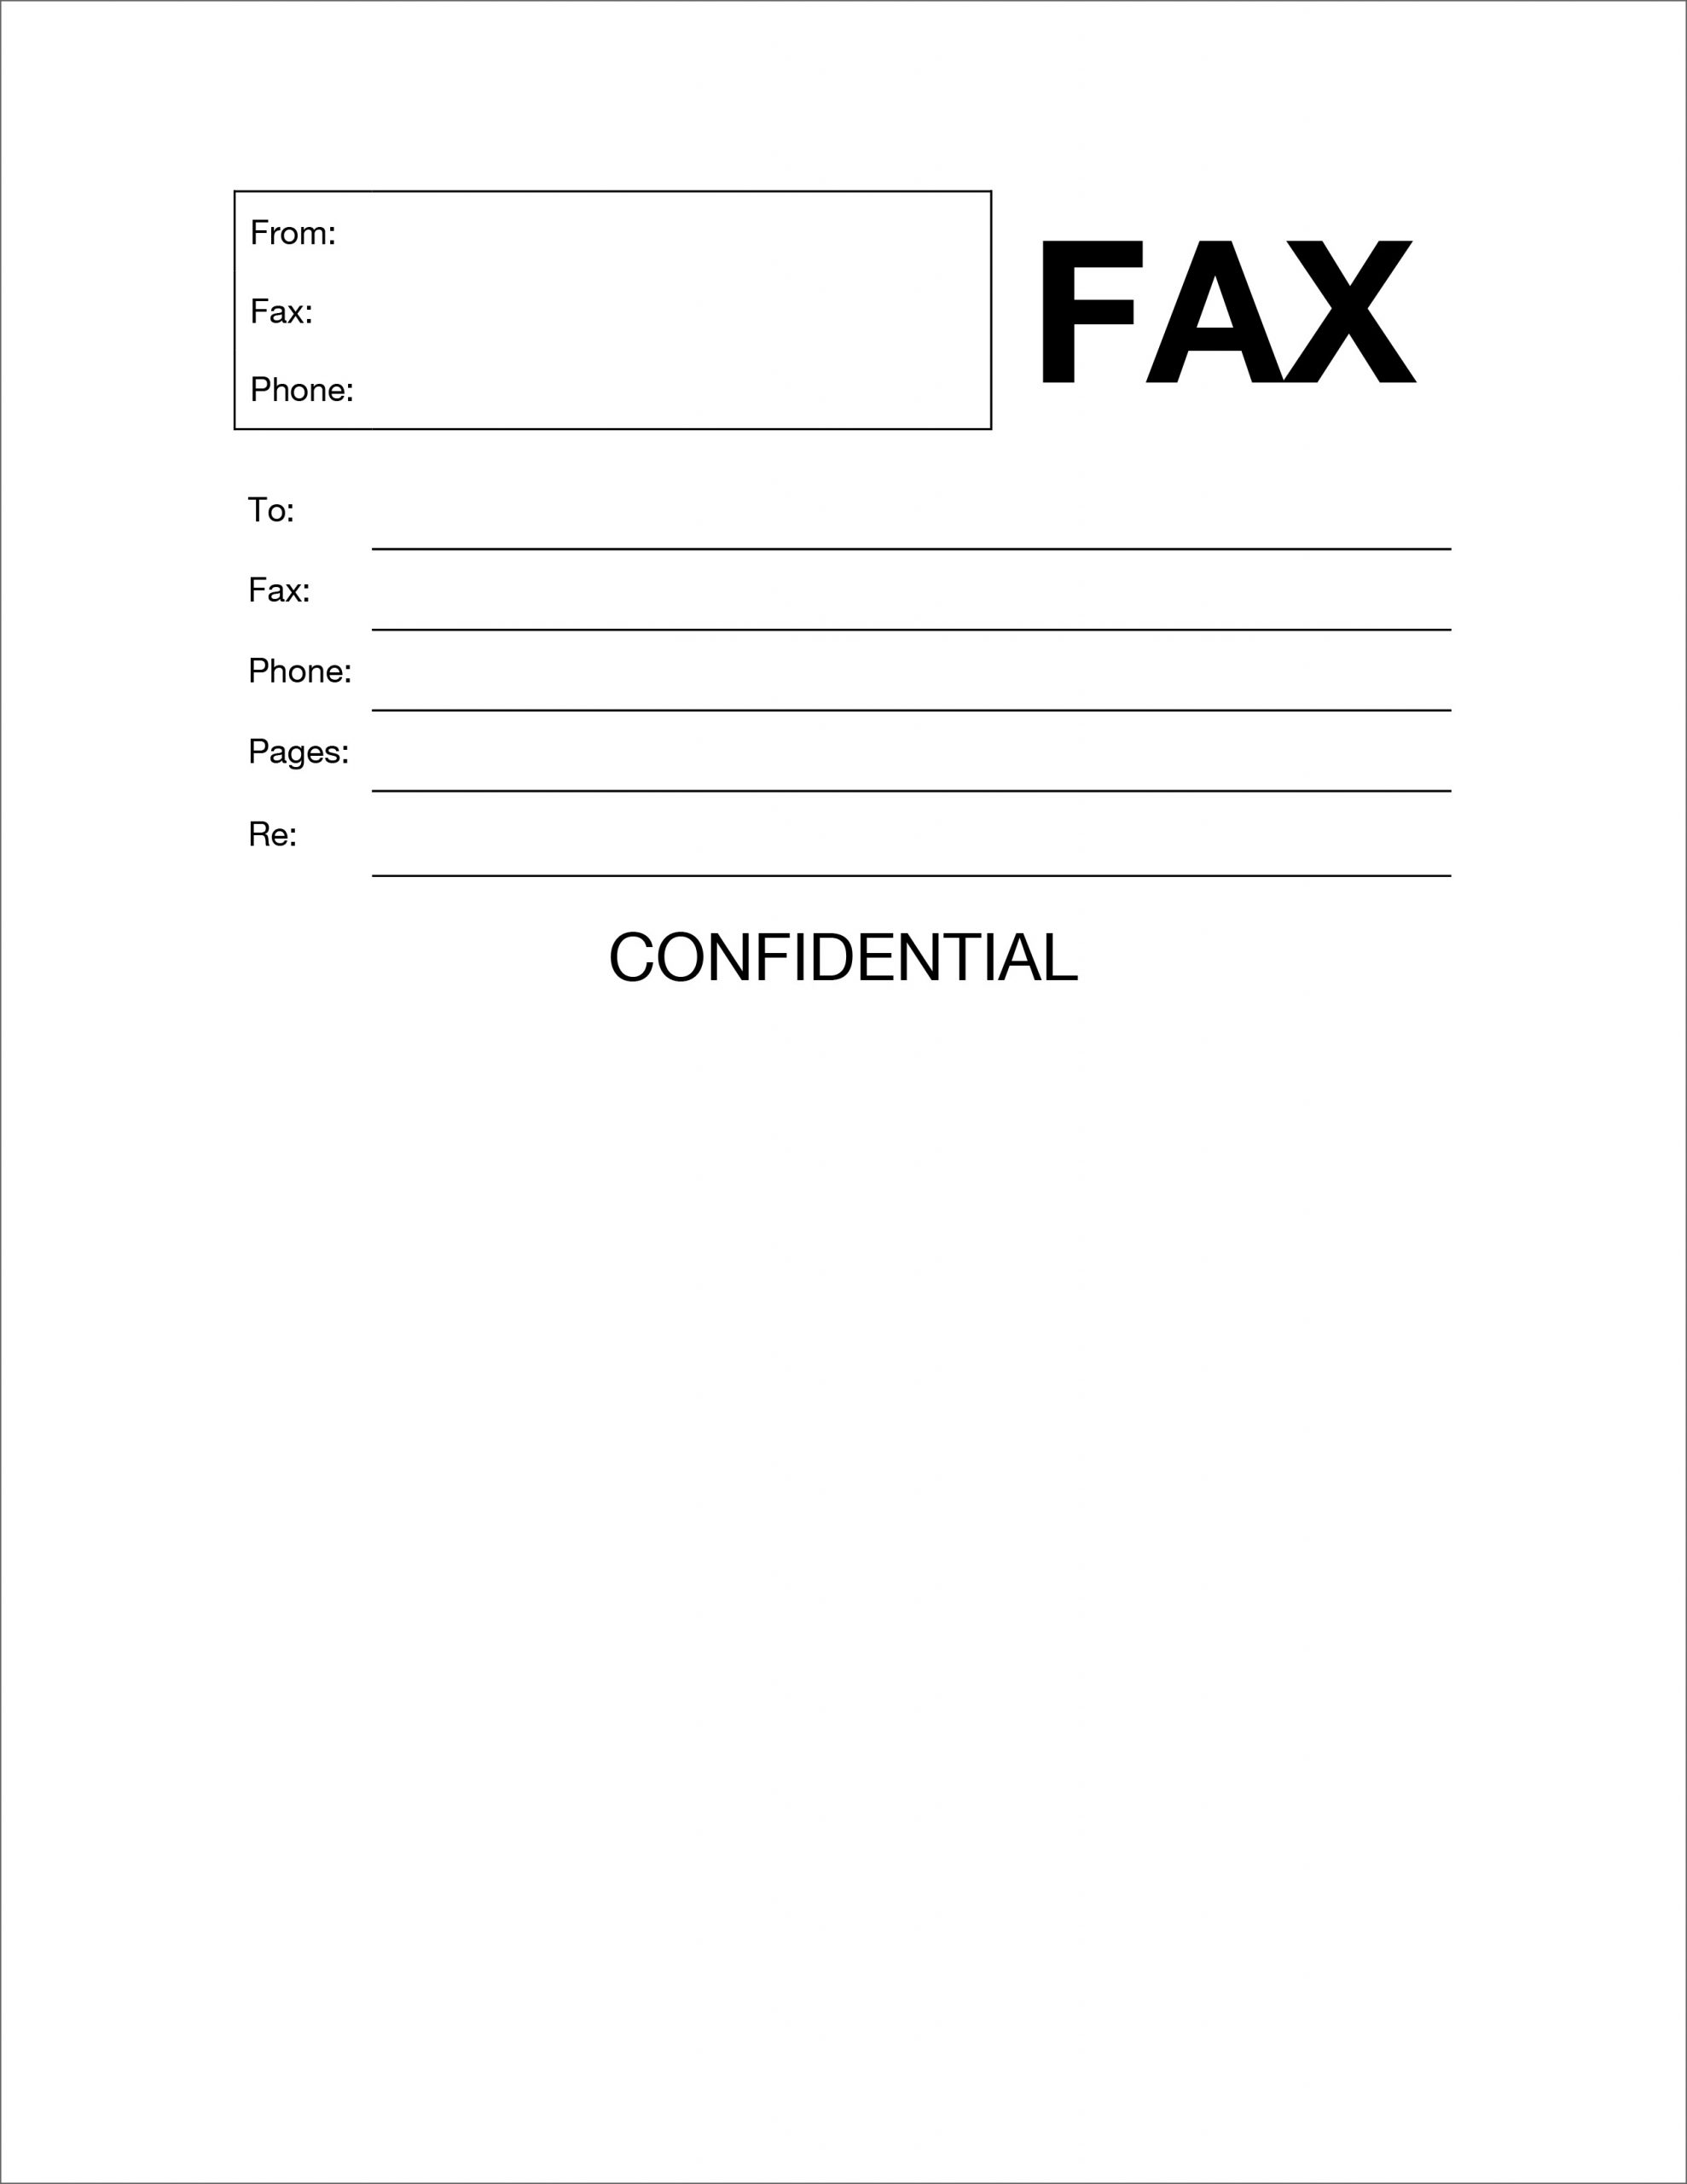 confidential-fax-cover-sheet-fax-cover-sheet-template